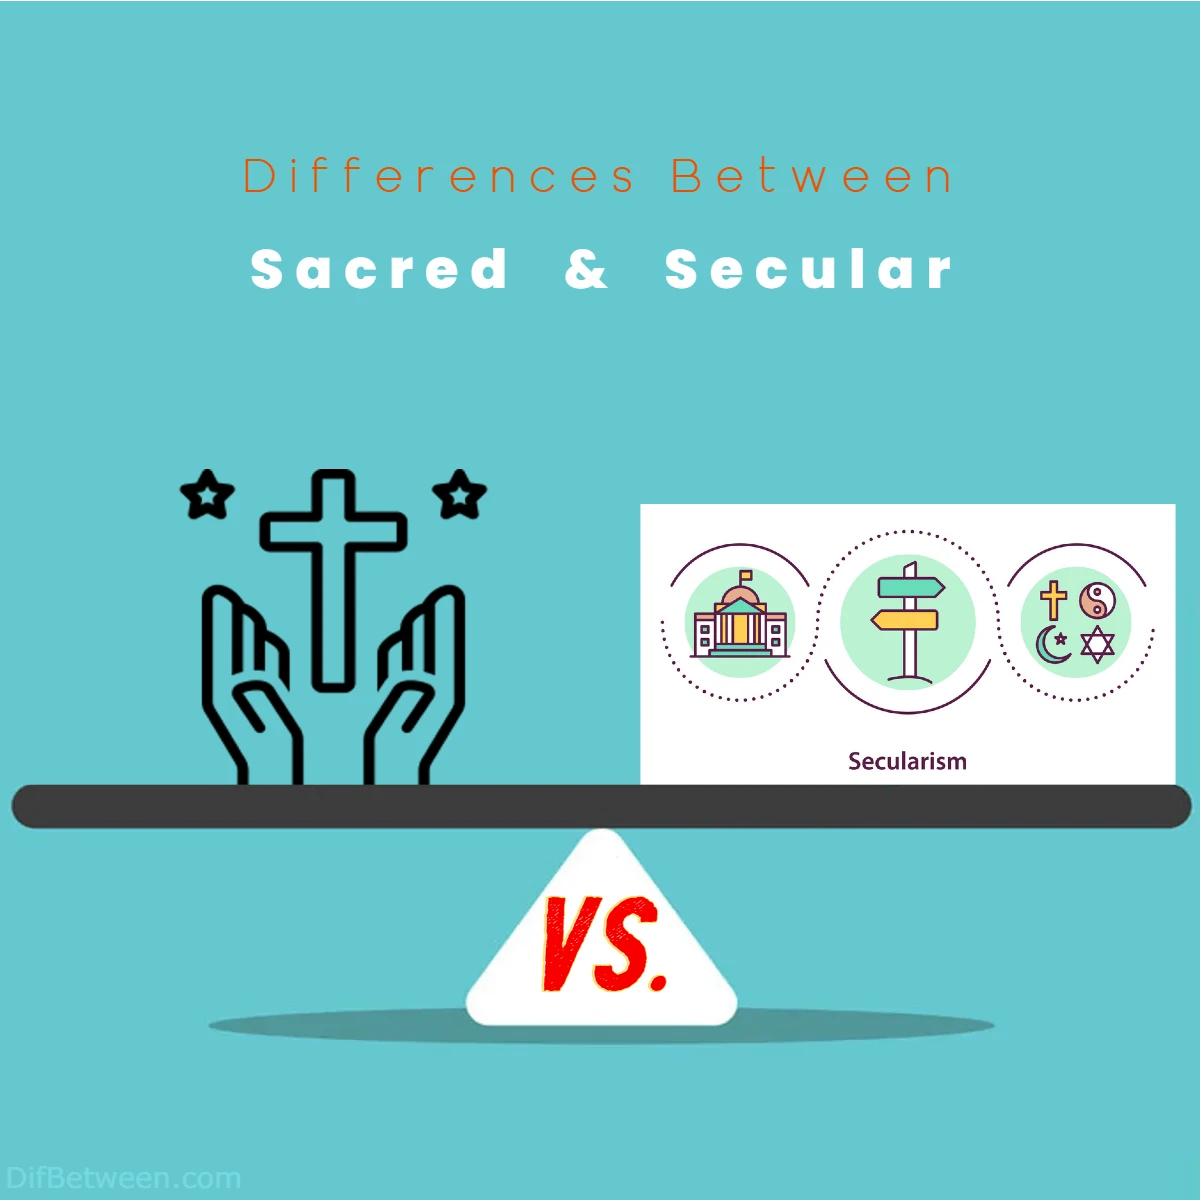 Differences Between Sacred vs Secular